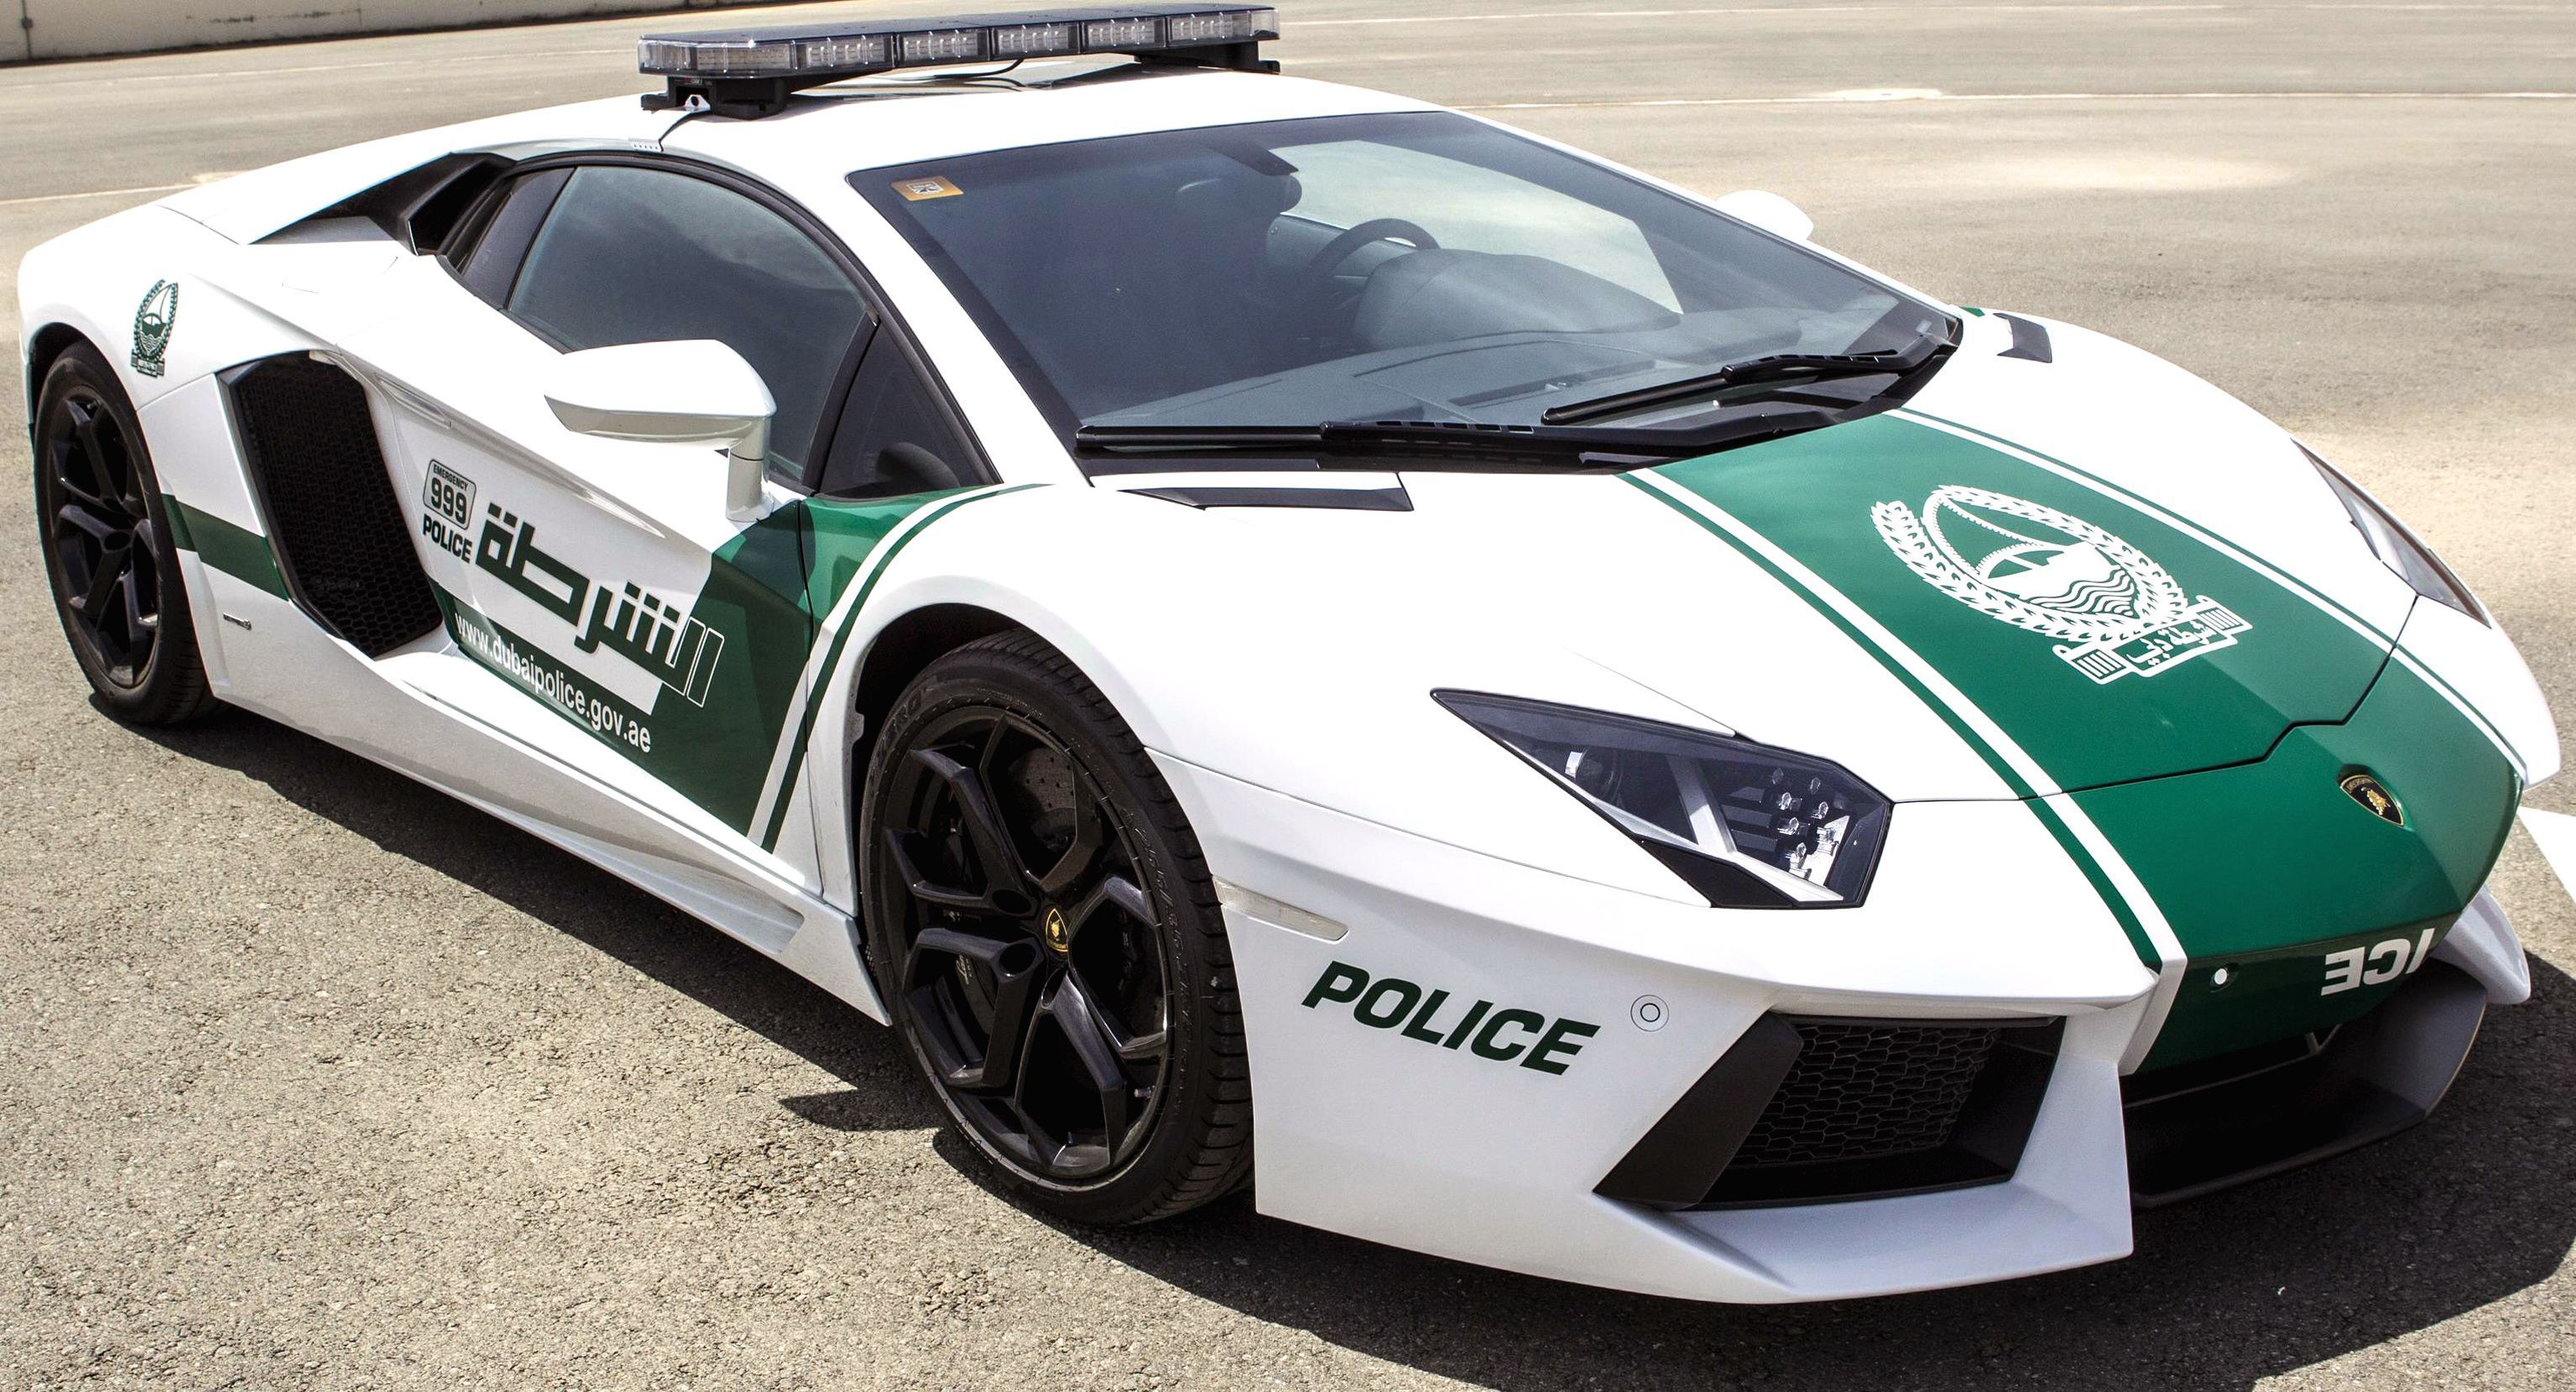 Dubai police car wallpapers Archives - Free Wallpaper In